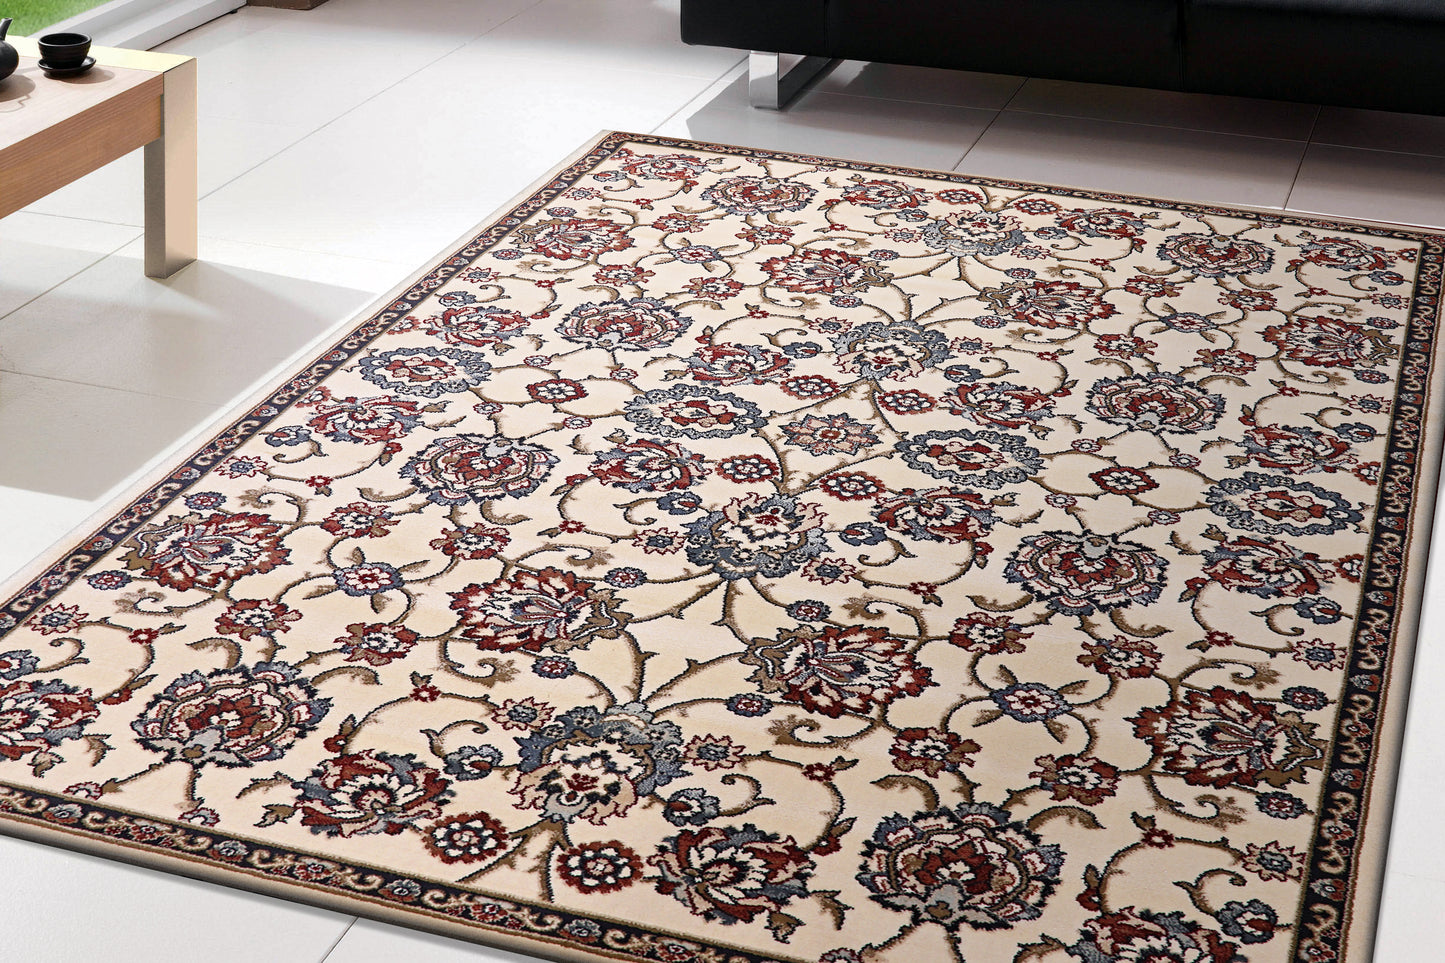 Melody 985020-414 Ivory Area Rug